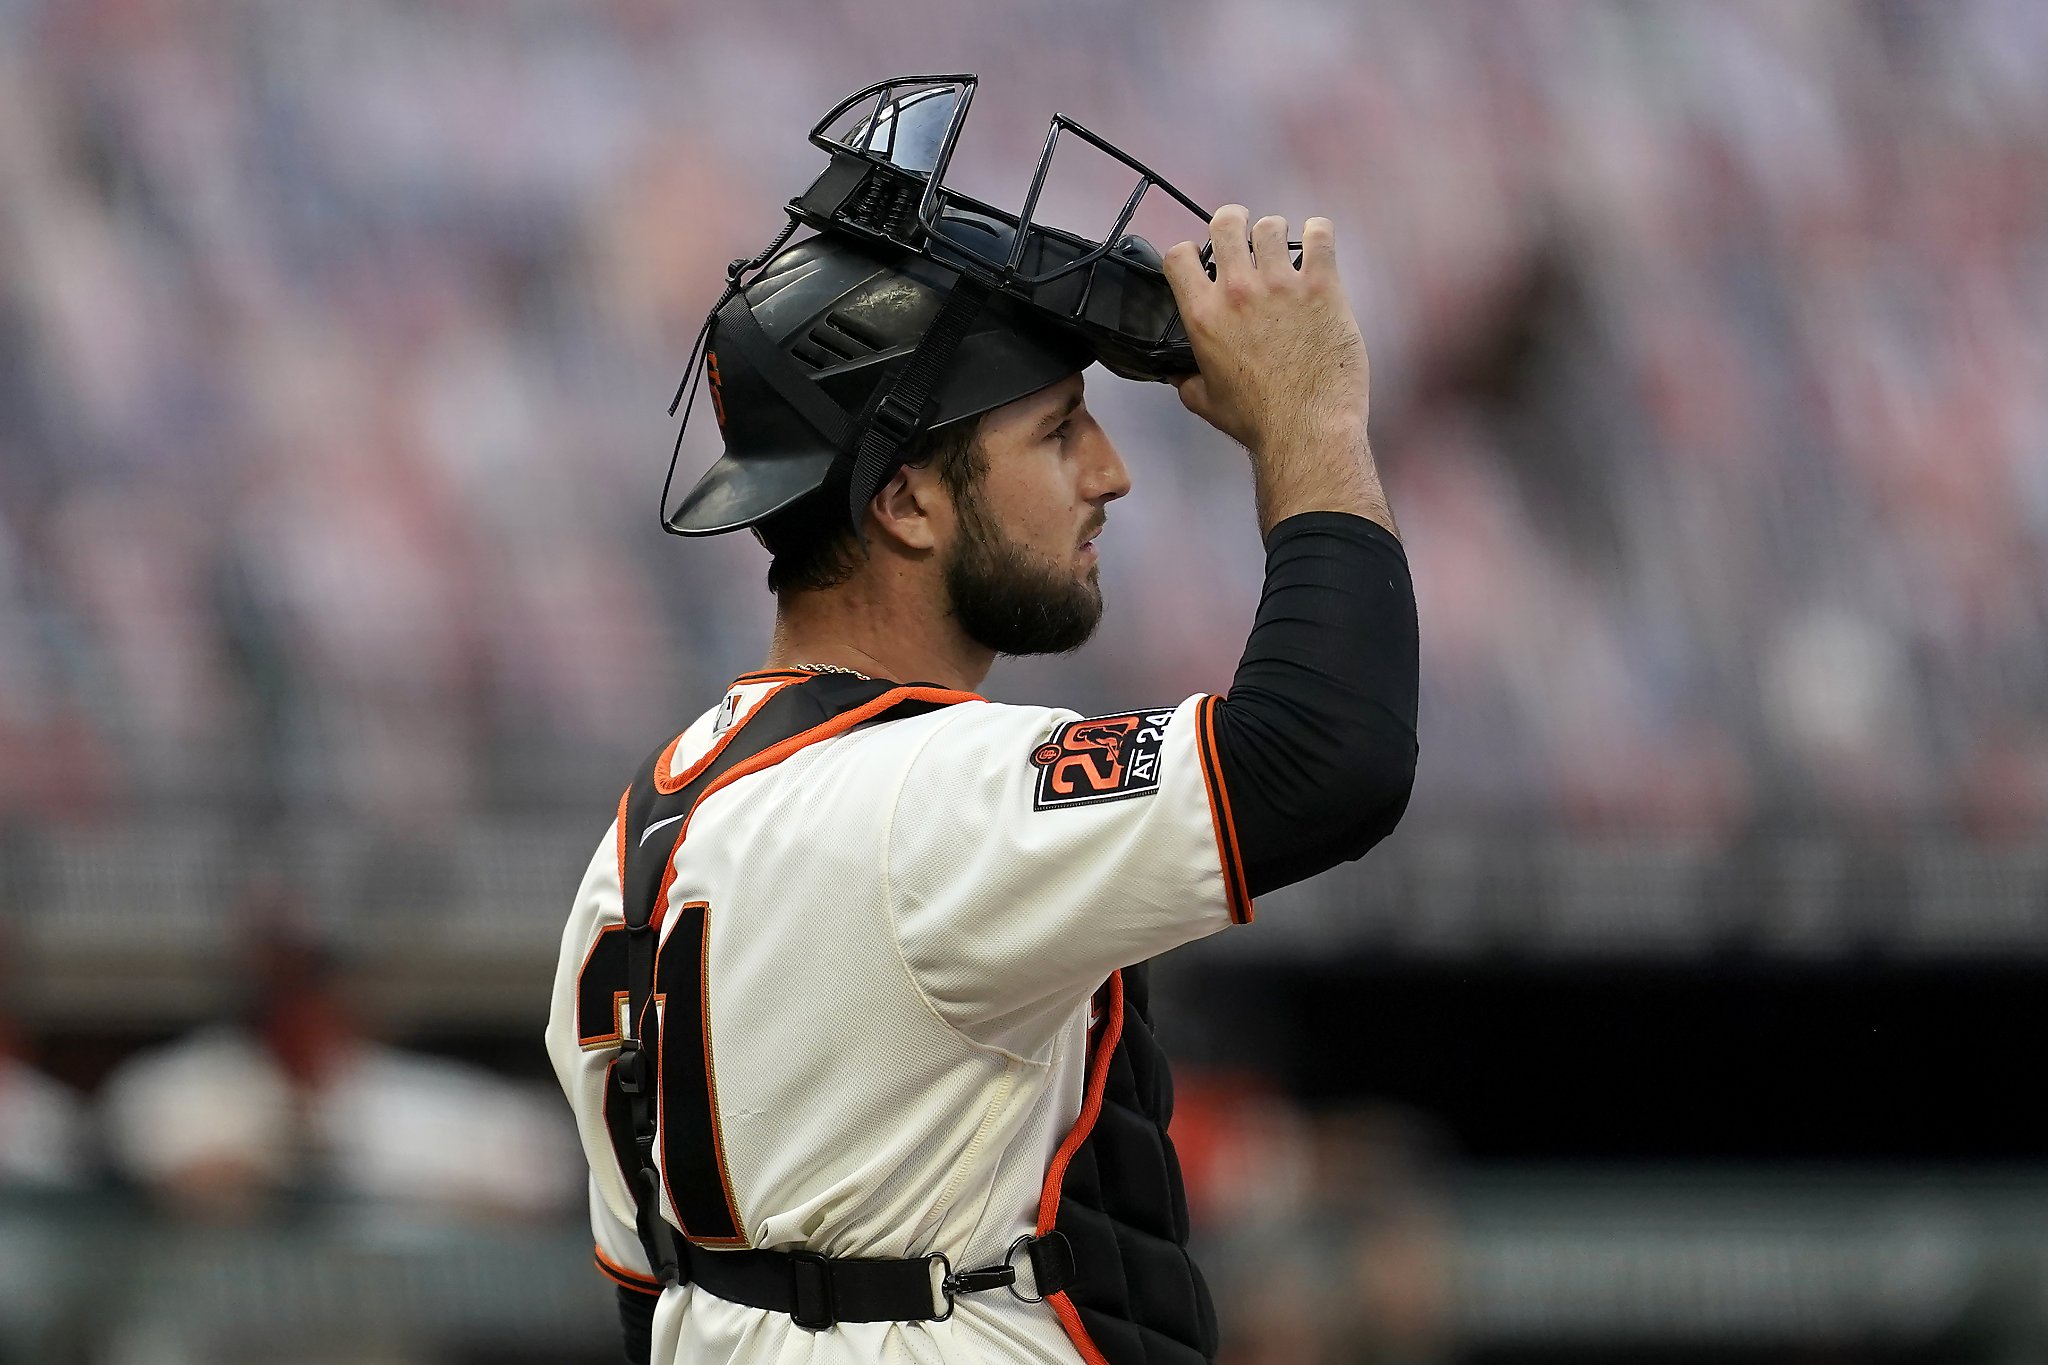 What Giants catcher Joey Bart is learning from 3-time champion Buster Posey